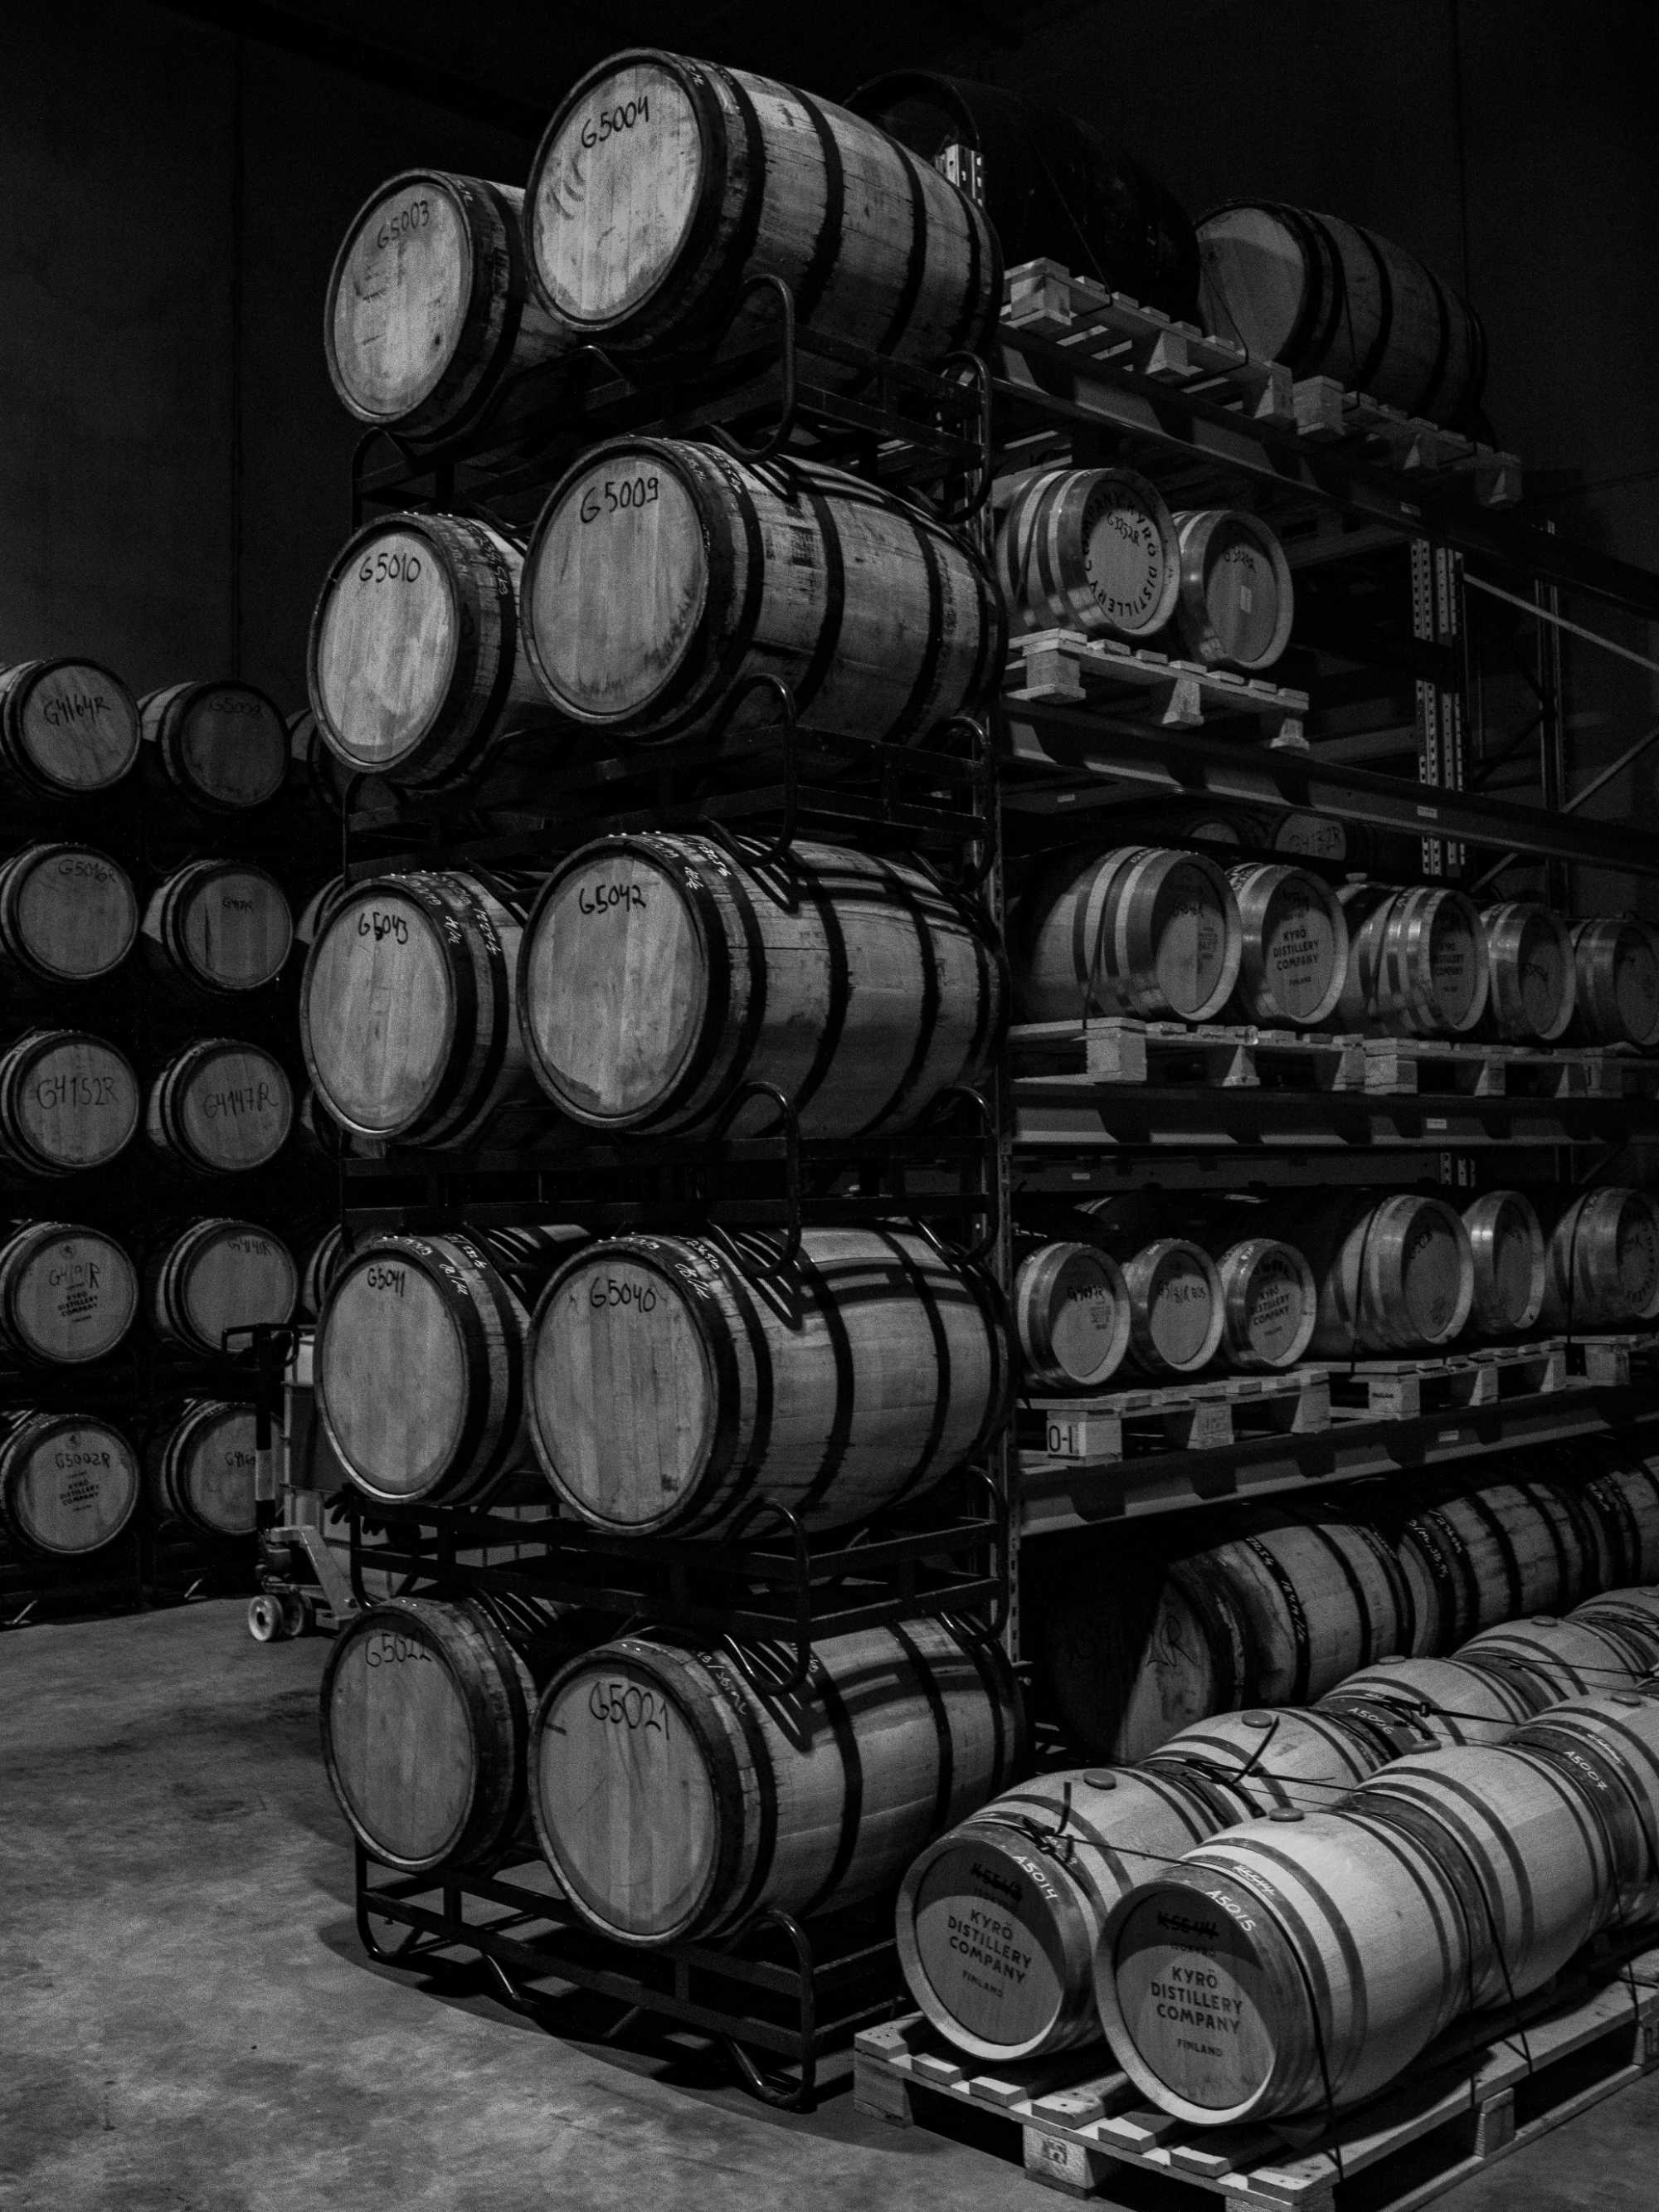 A black and white image of one of the Kyrö barrel warehouses, pictured are wooden barrels stacked atop one another. 